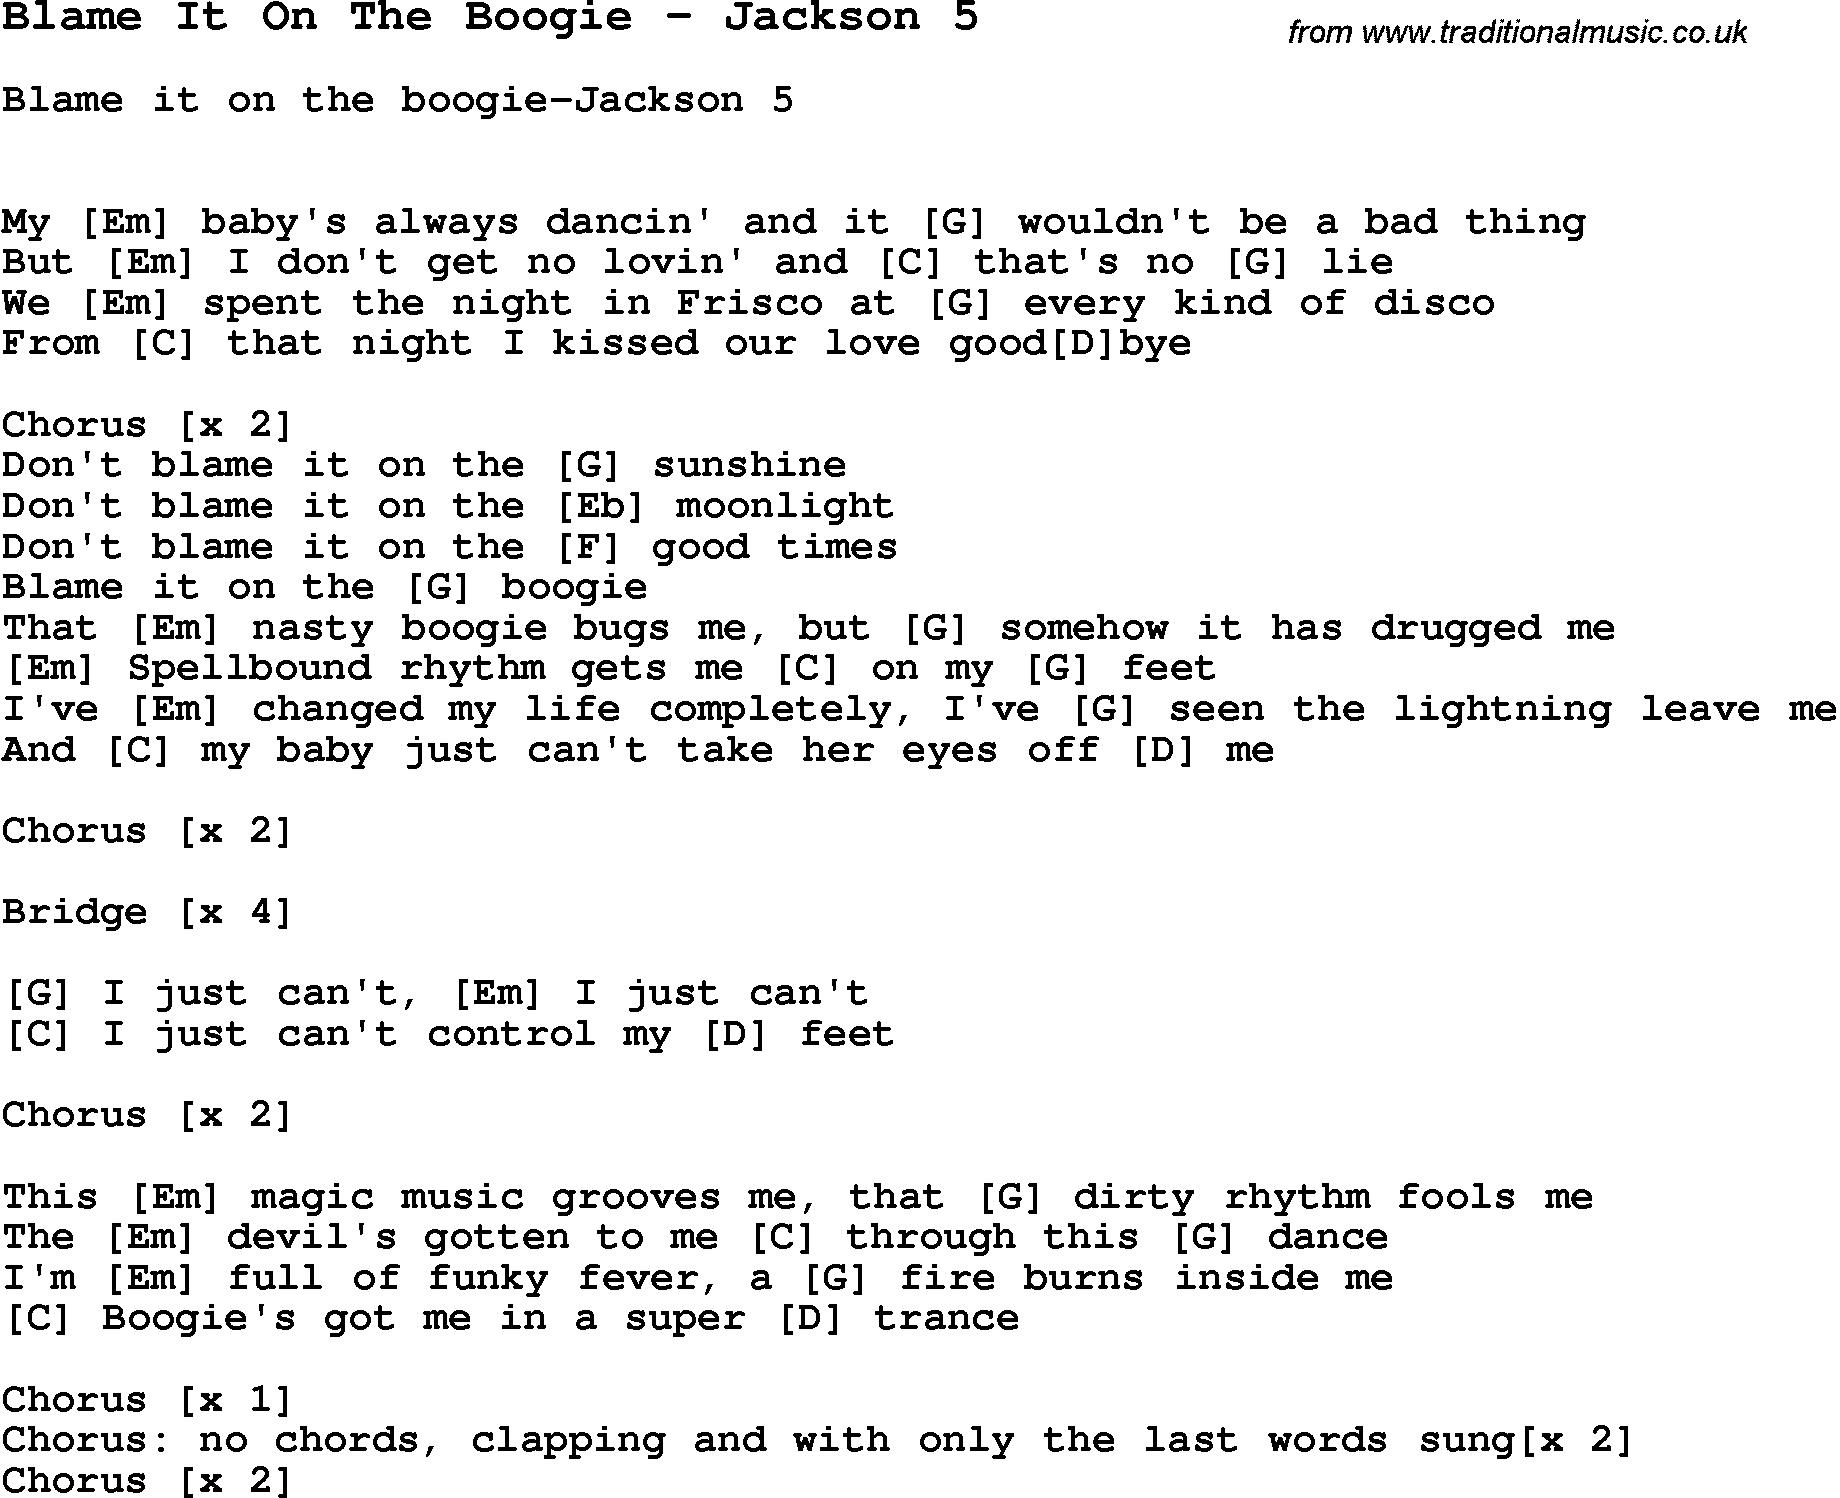 Song Blame It On The Boogie by Jackson 5, with lyrics for vocal performance and accompaniment chords for Ukulele, Guitar Banjo etc.